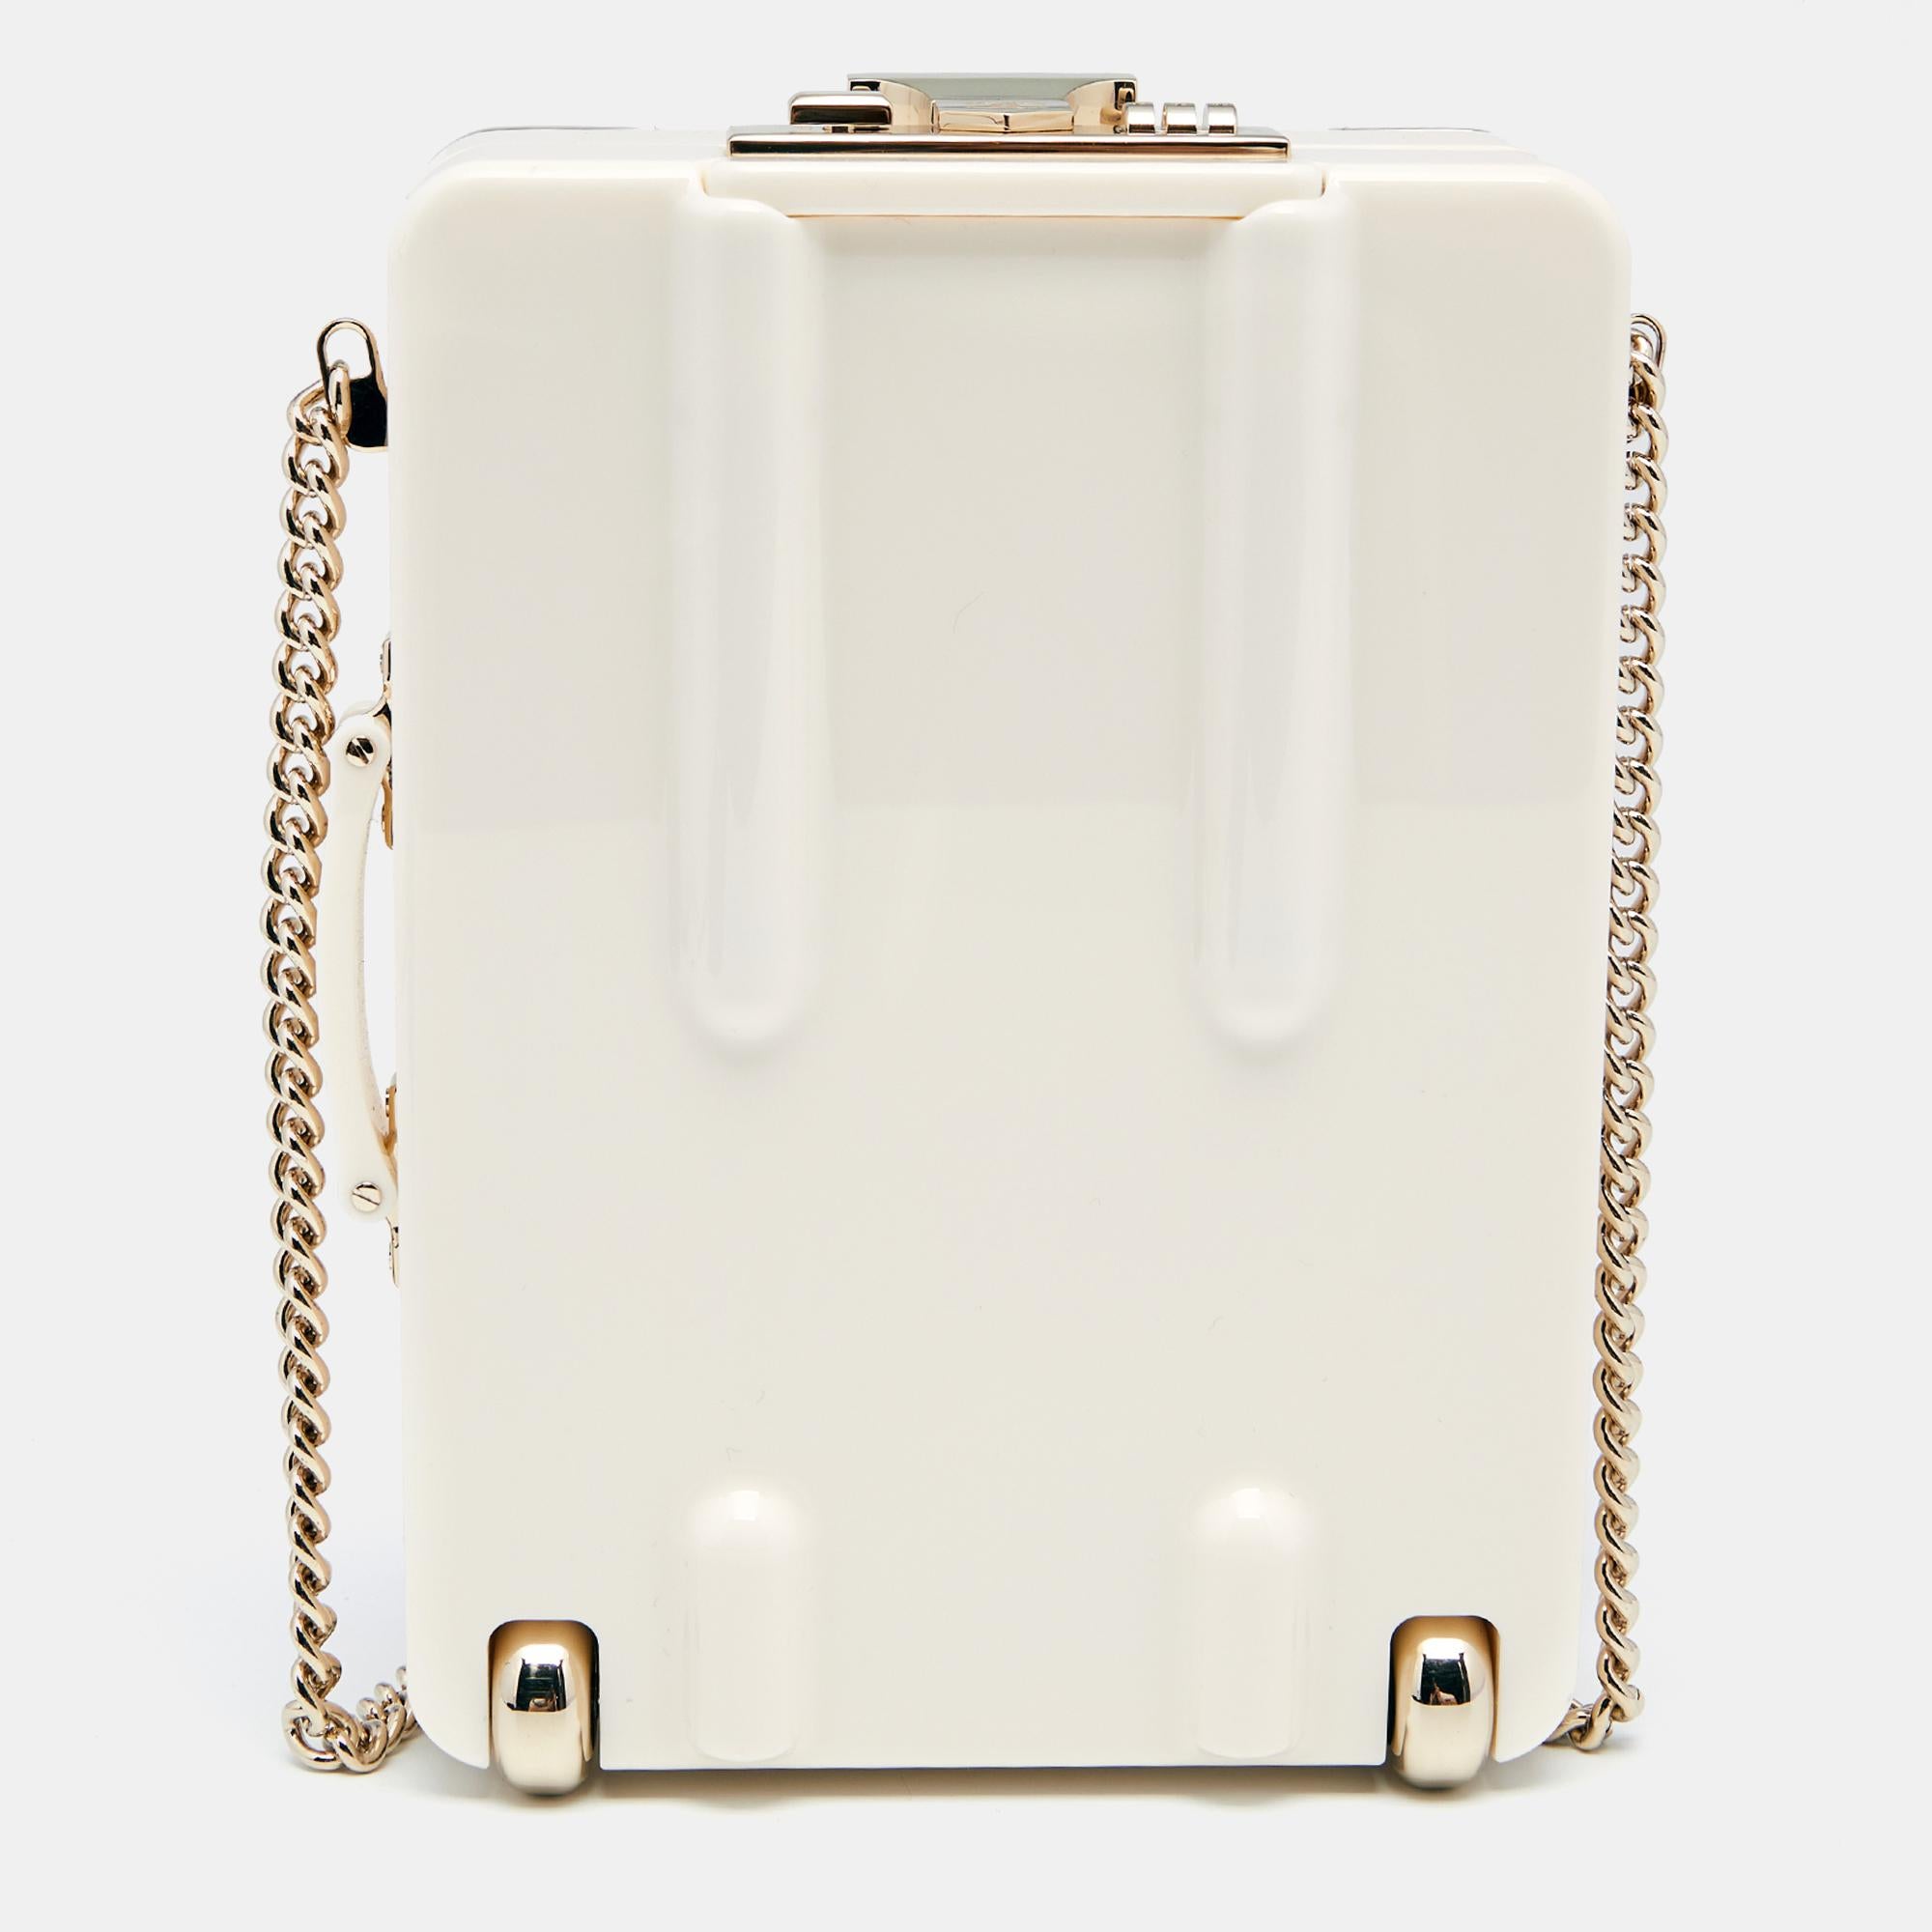 Chanel's Evening In The Air clutch exhibits the brand's flair to make chic designs with subdued charm. The exterior is a construction of patent leather and perspex, accentuated by quilts. The silhouette comes in the minaudière size and resembles a